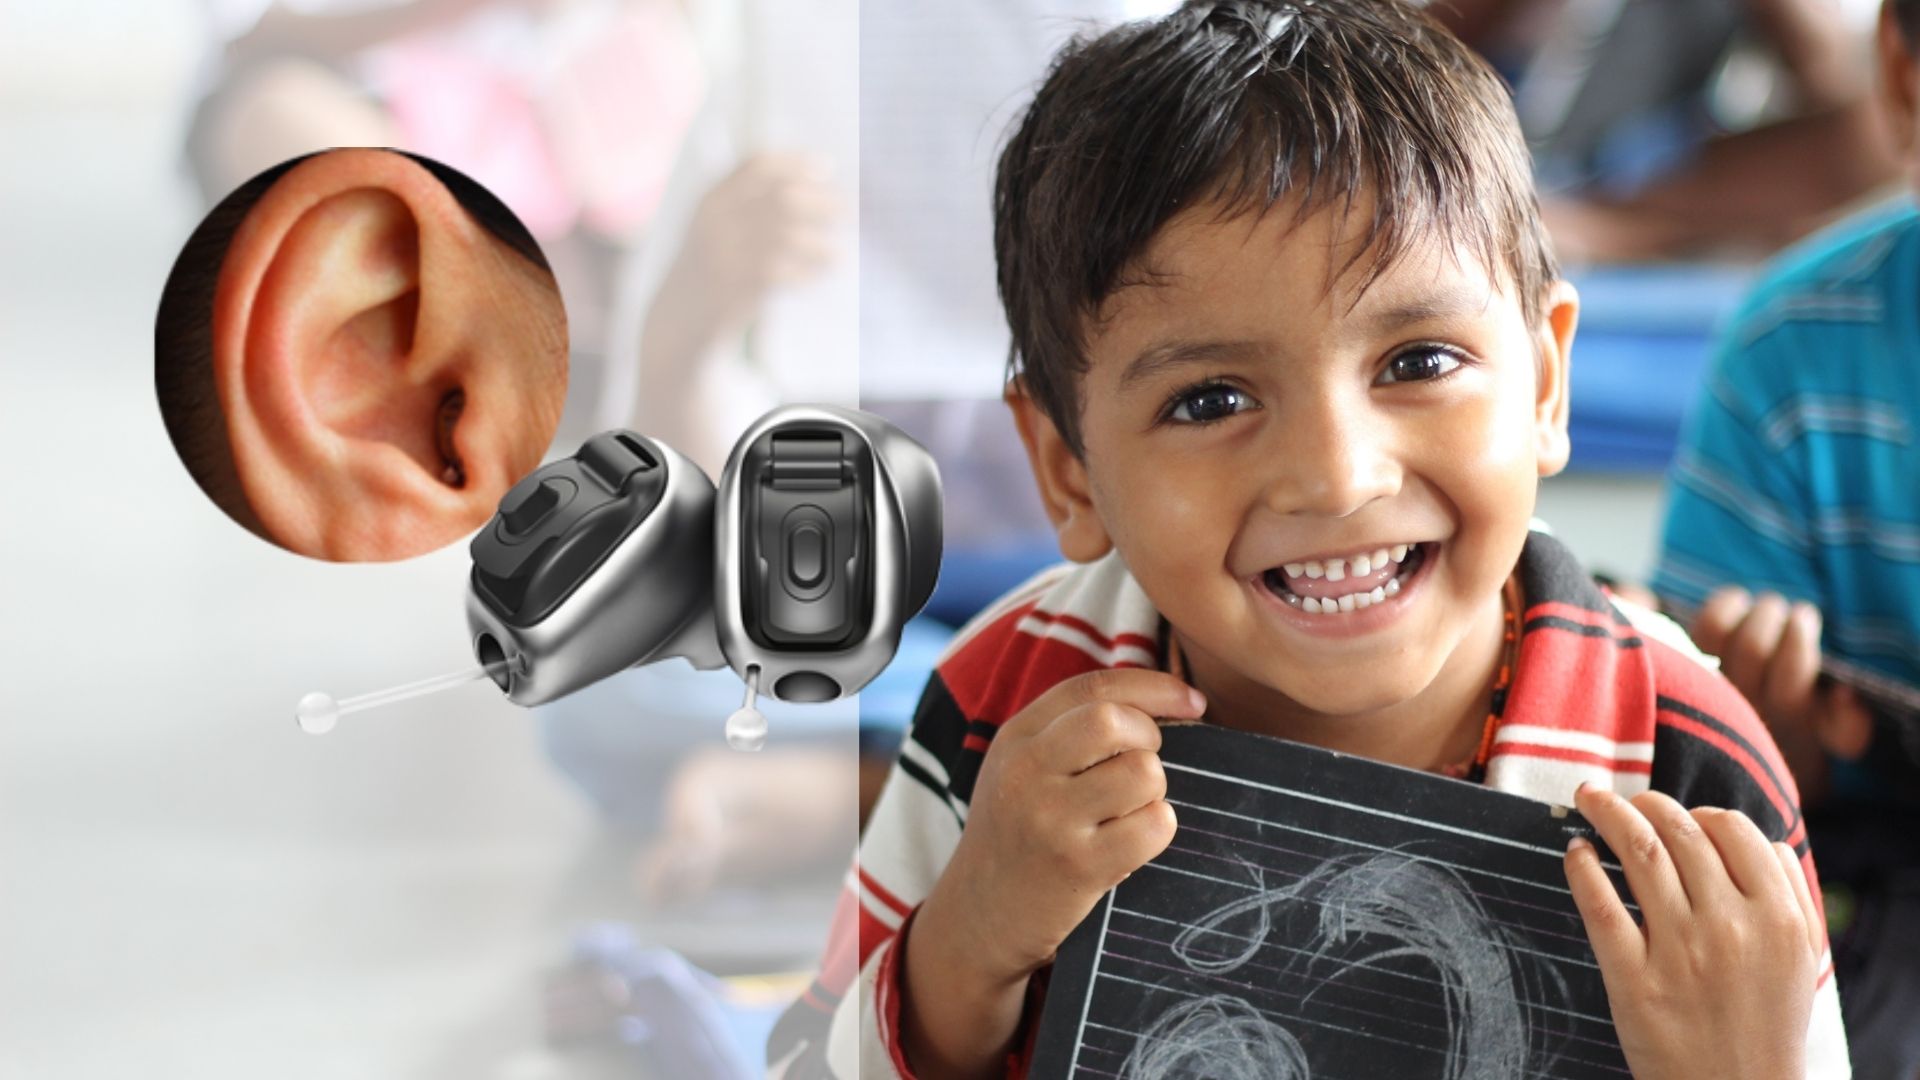 IIC Hearing Aid Helps Children With Their Hearing Loss